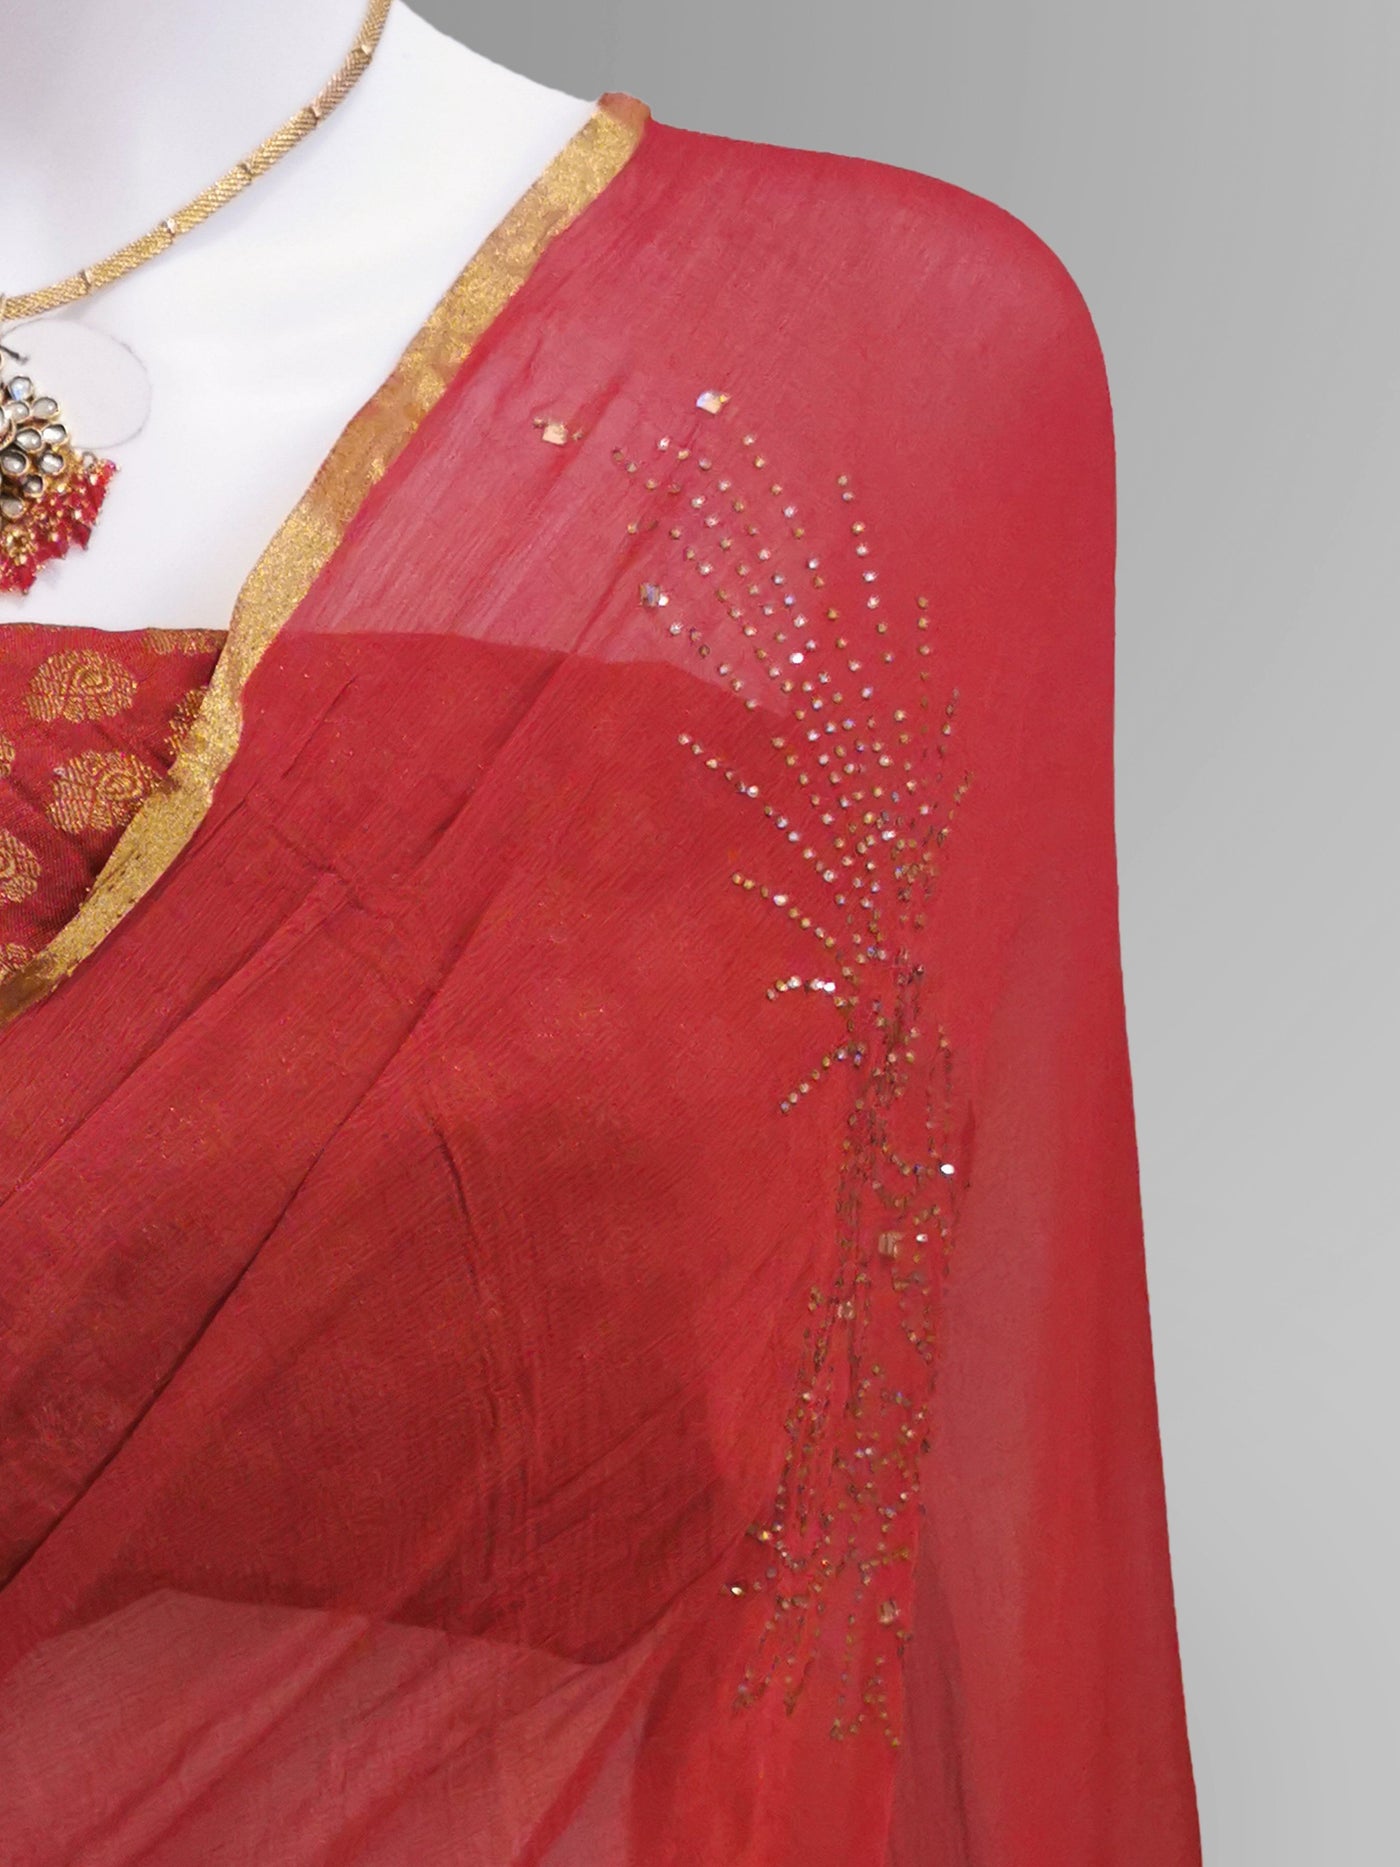 Saree in Crimson Red With Subtle Golden Embroidery Indian Clothing in Denver, CO, Aurora, CO, Boulder, CO, Fort Collins, CO, Colorado Springs, CO, Parker, CO, Highlands Ranch, CO, Cherry Creek, CO, Centennial, CO, and Longmont, CO. NATIONWIDE SHIPPING USA- India Fashion X